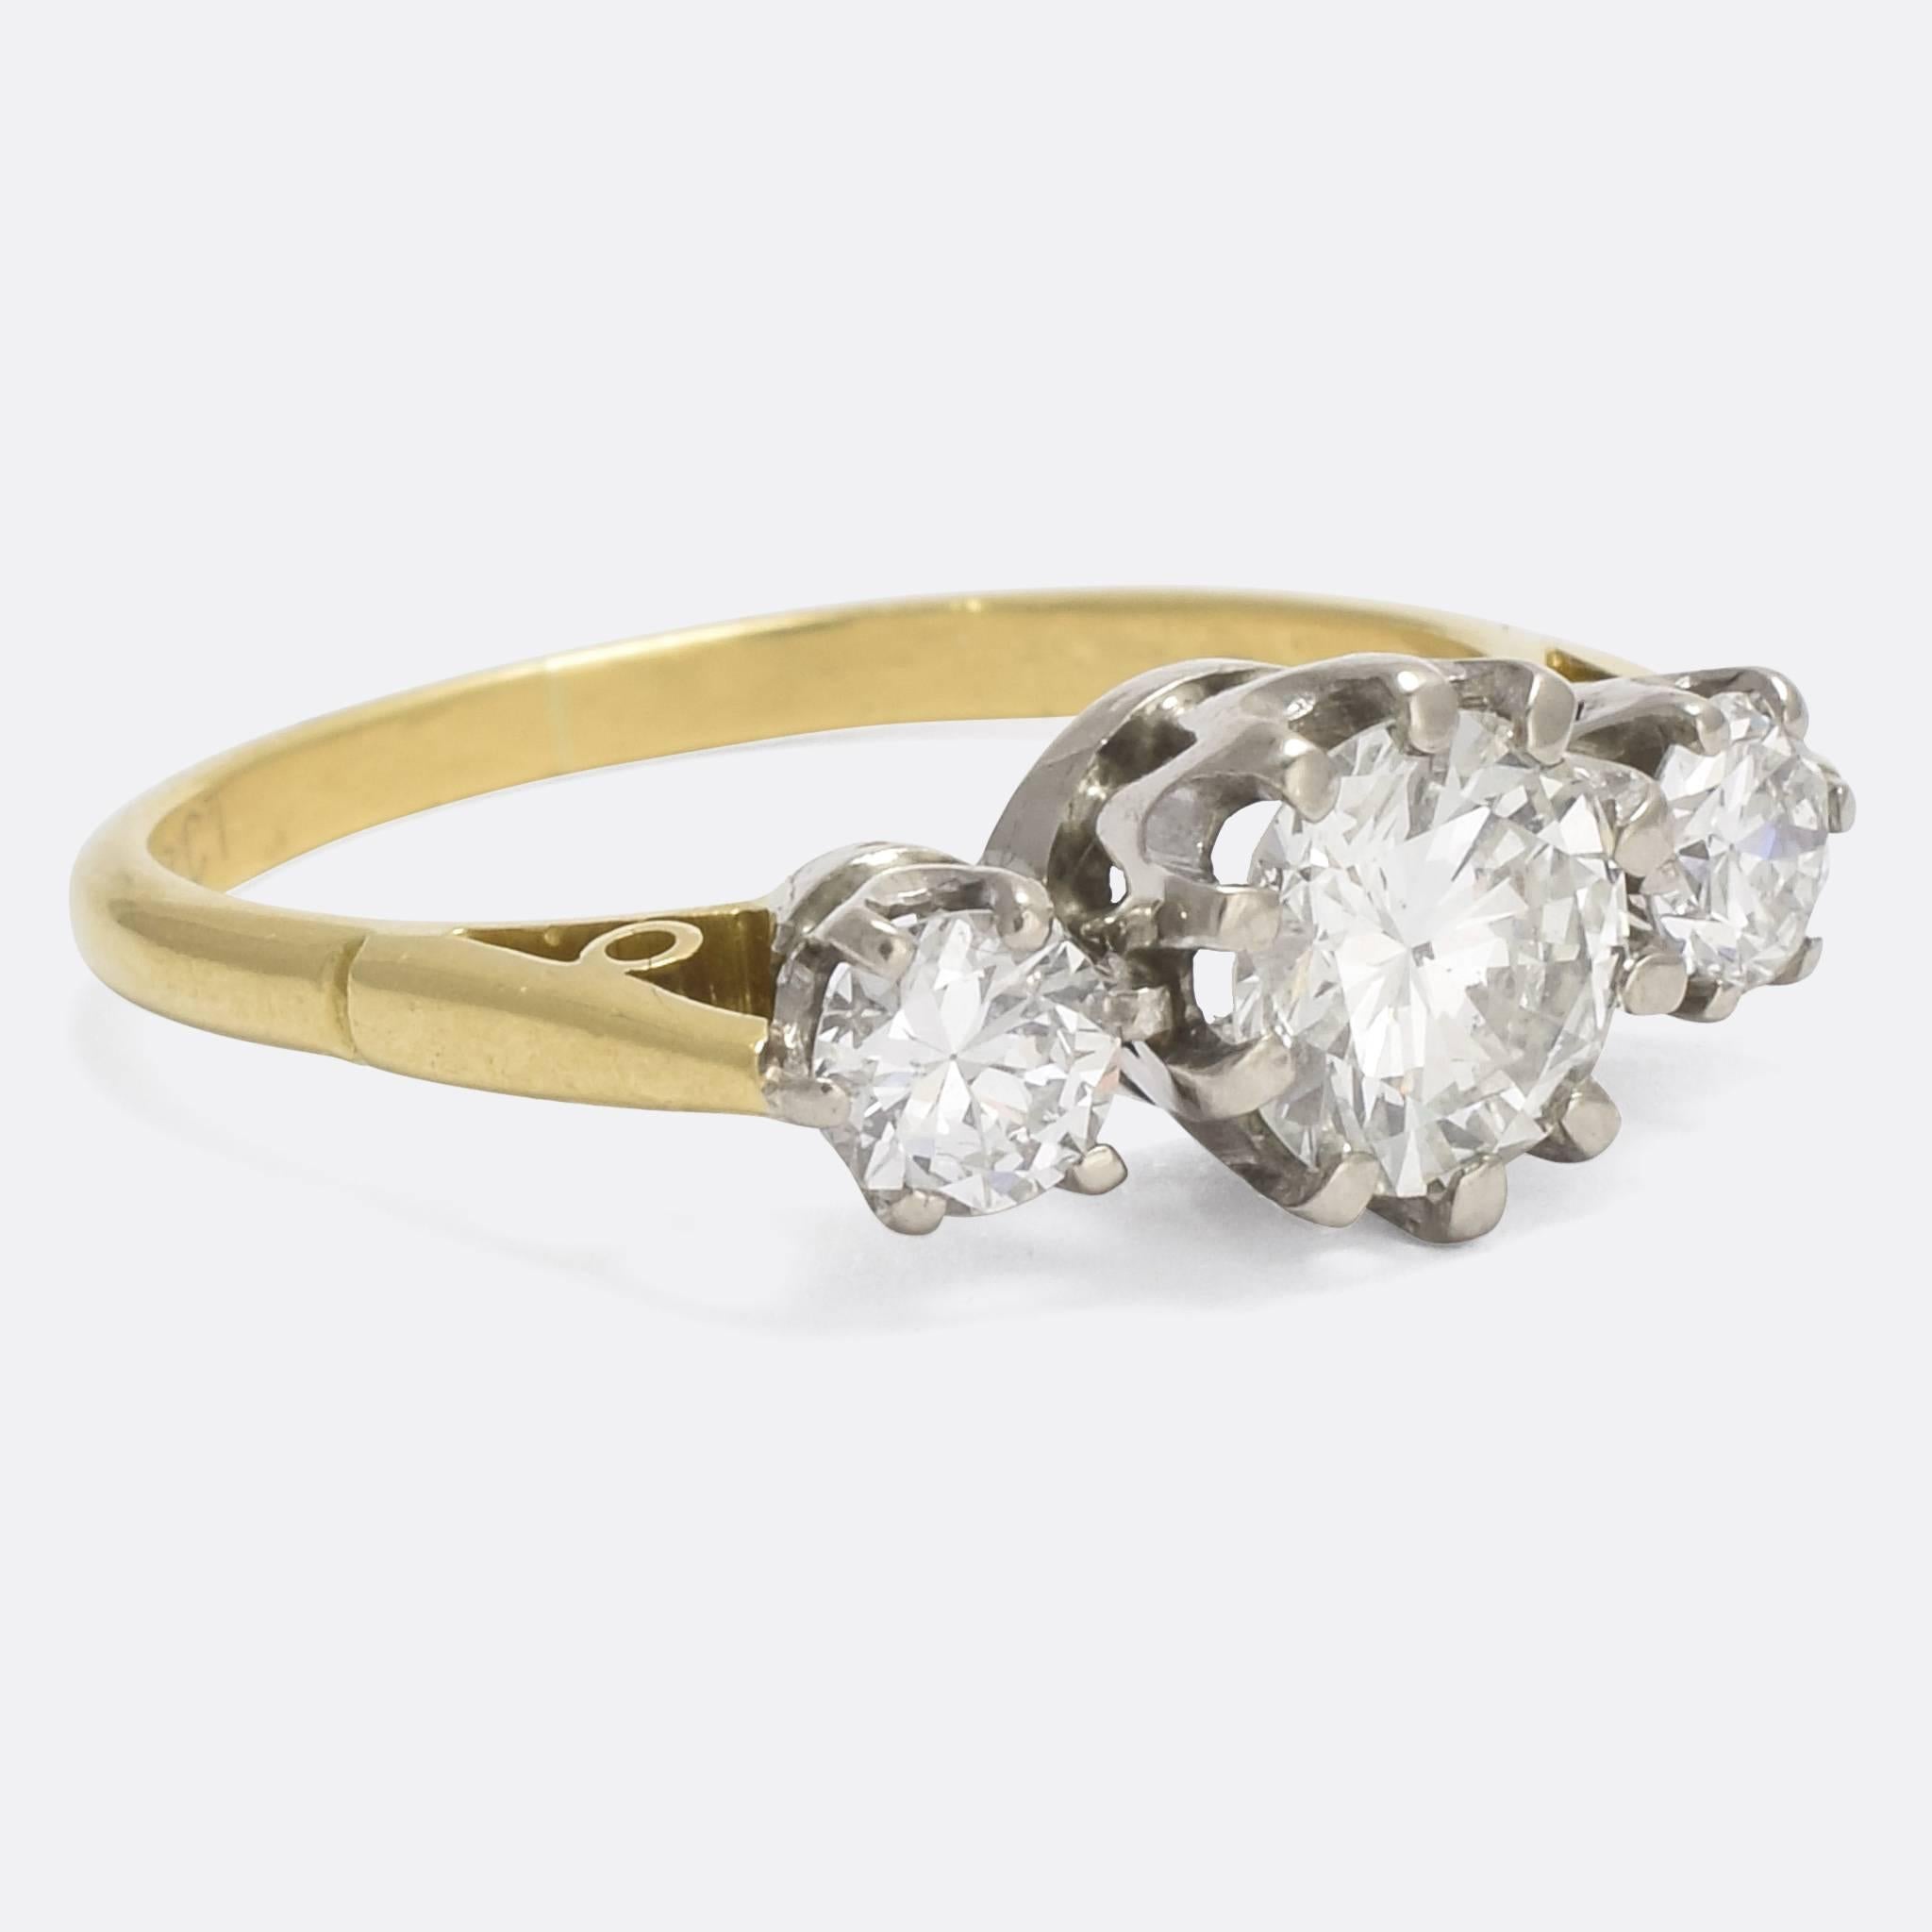 A spectacular 1930s diamond trilogy ring, set with a carat centre stone flanked by two quarter carat stones. Modelled in 18k yellow gold with platinum claw mounts, the diamonds are clean and bright. It would make the perfect vintage engagement